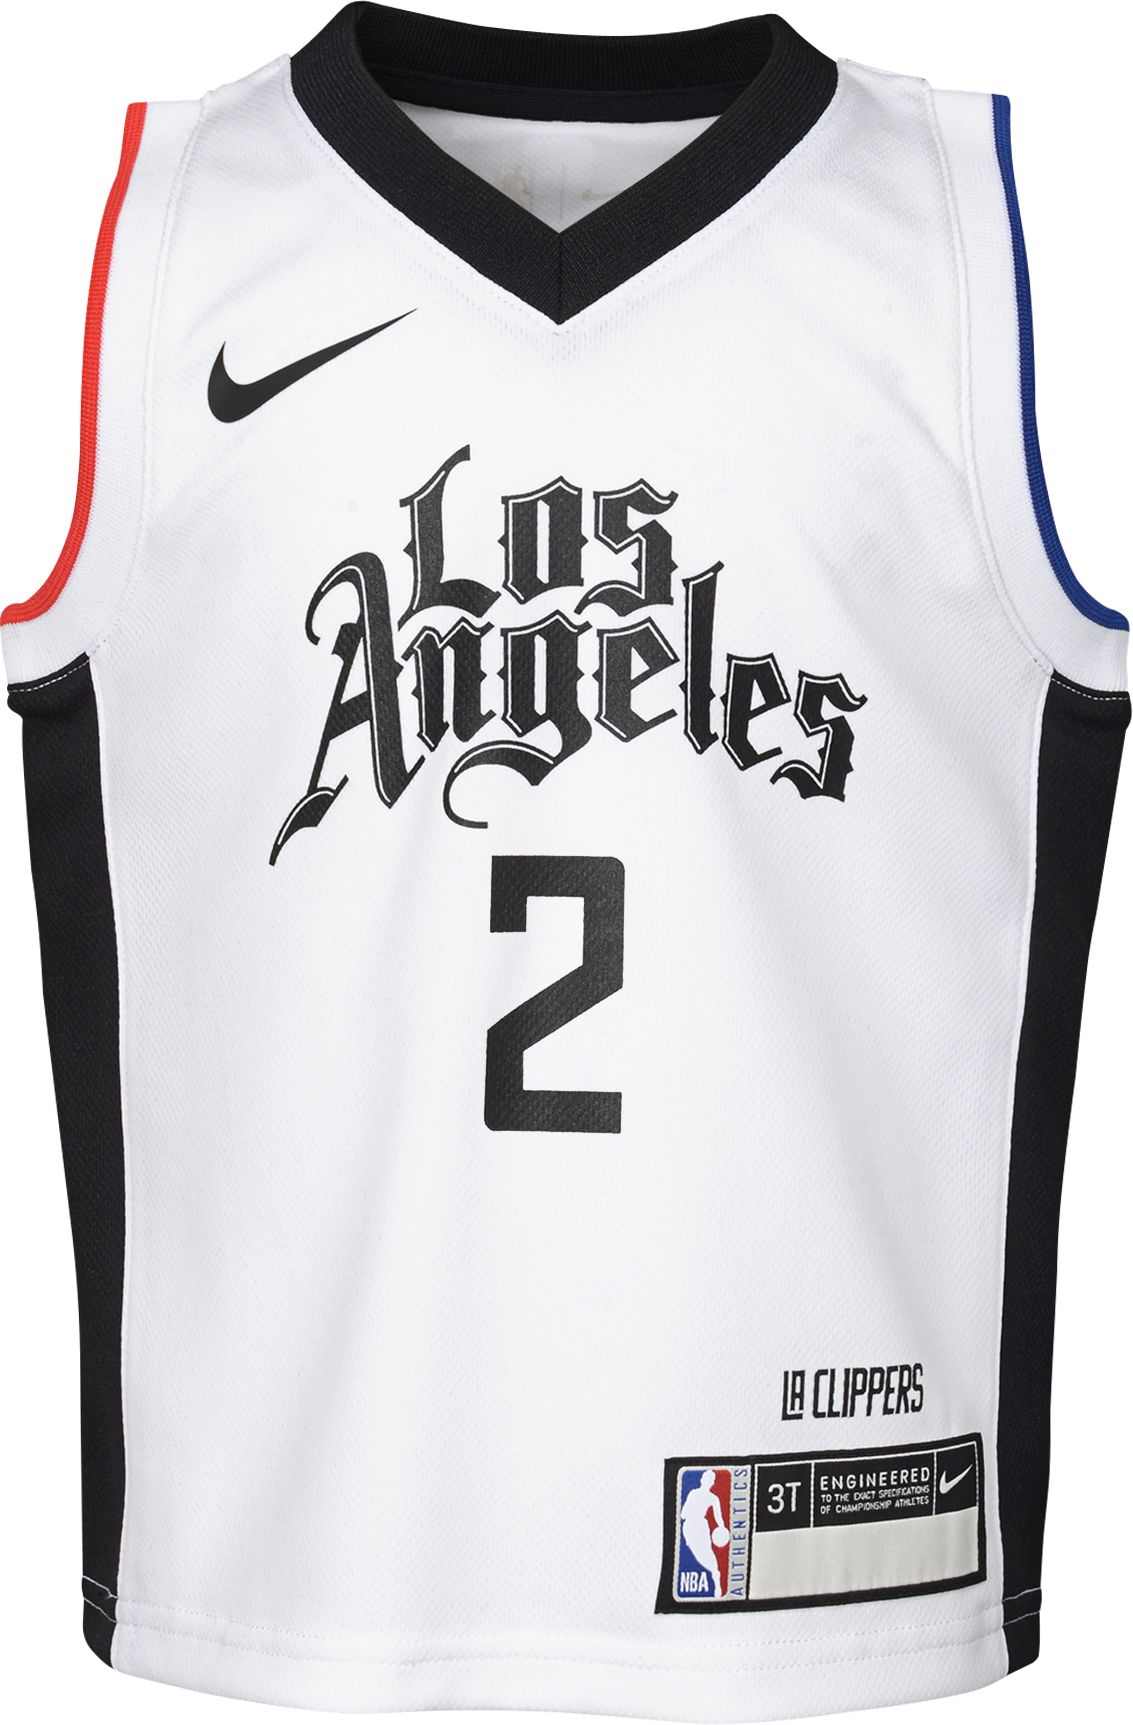 clippers city jersey kawhi